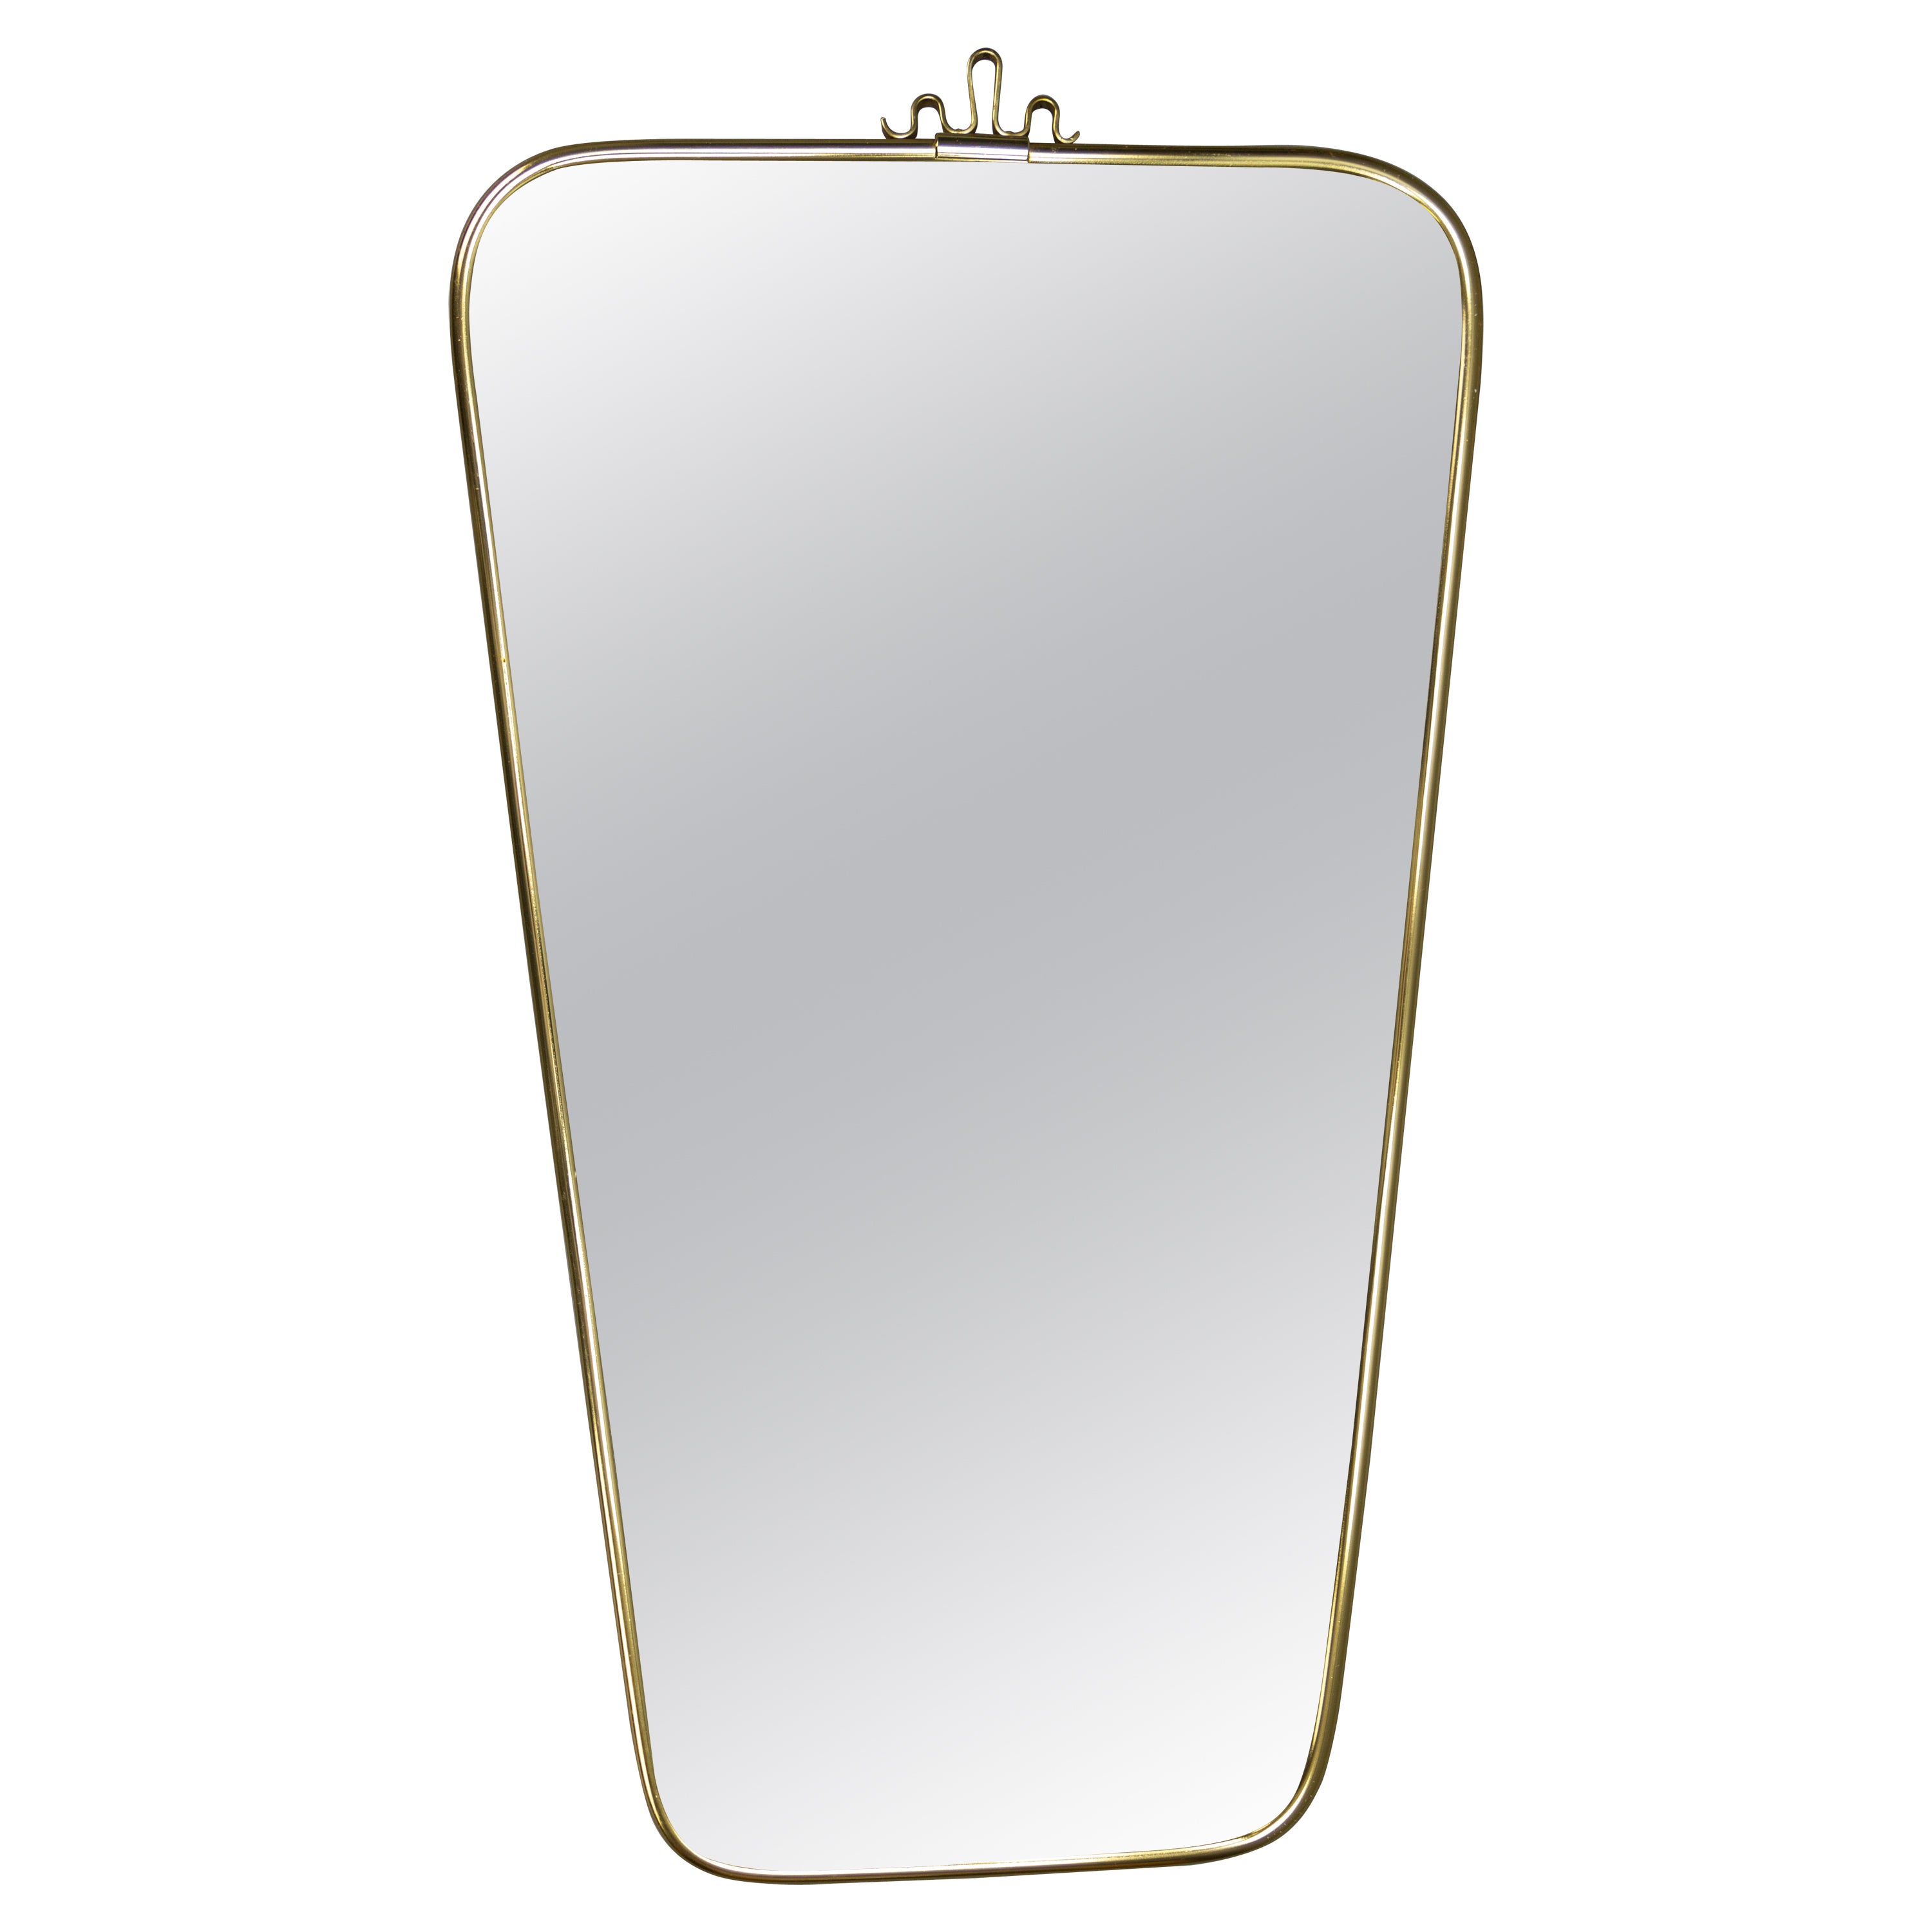 German Mid-Century Modern Brass Frame Wall Mirror by Lenzgold, 1960s For Sale